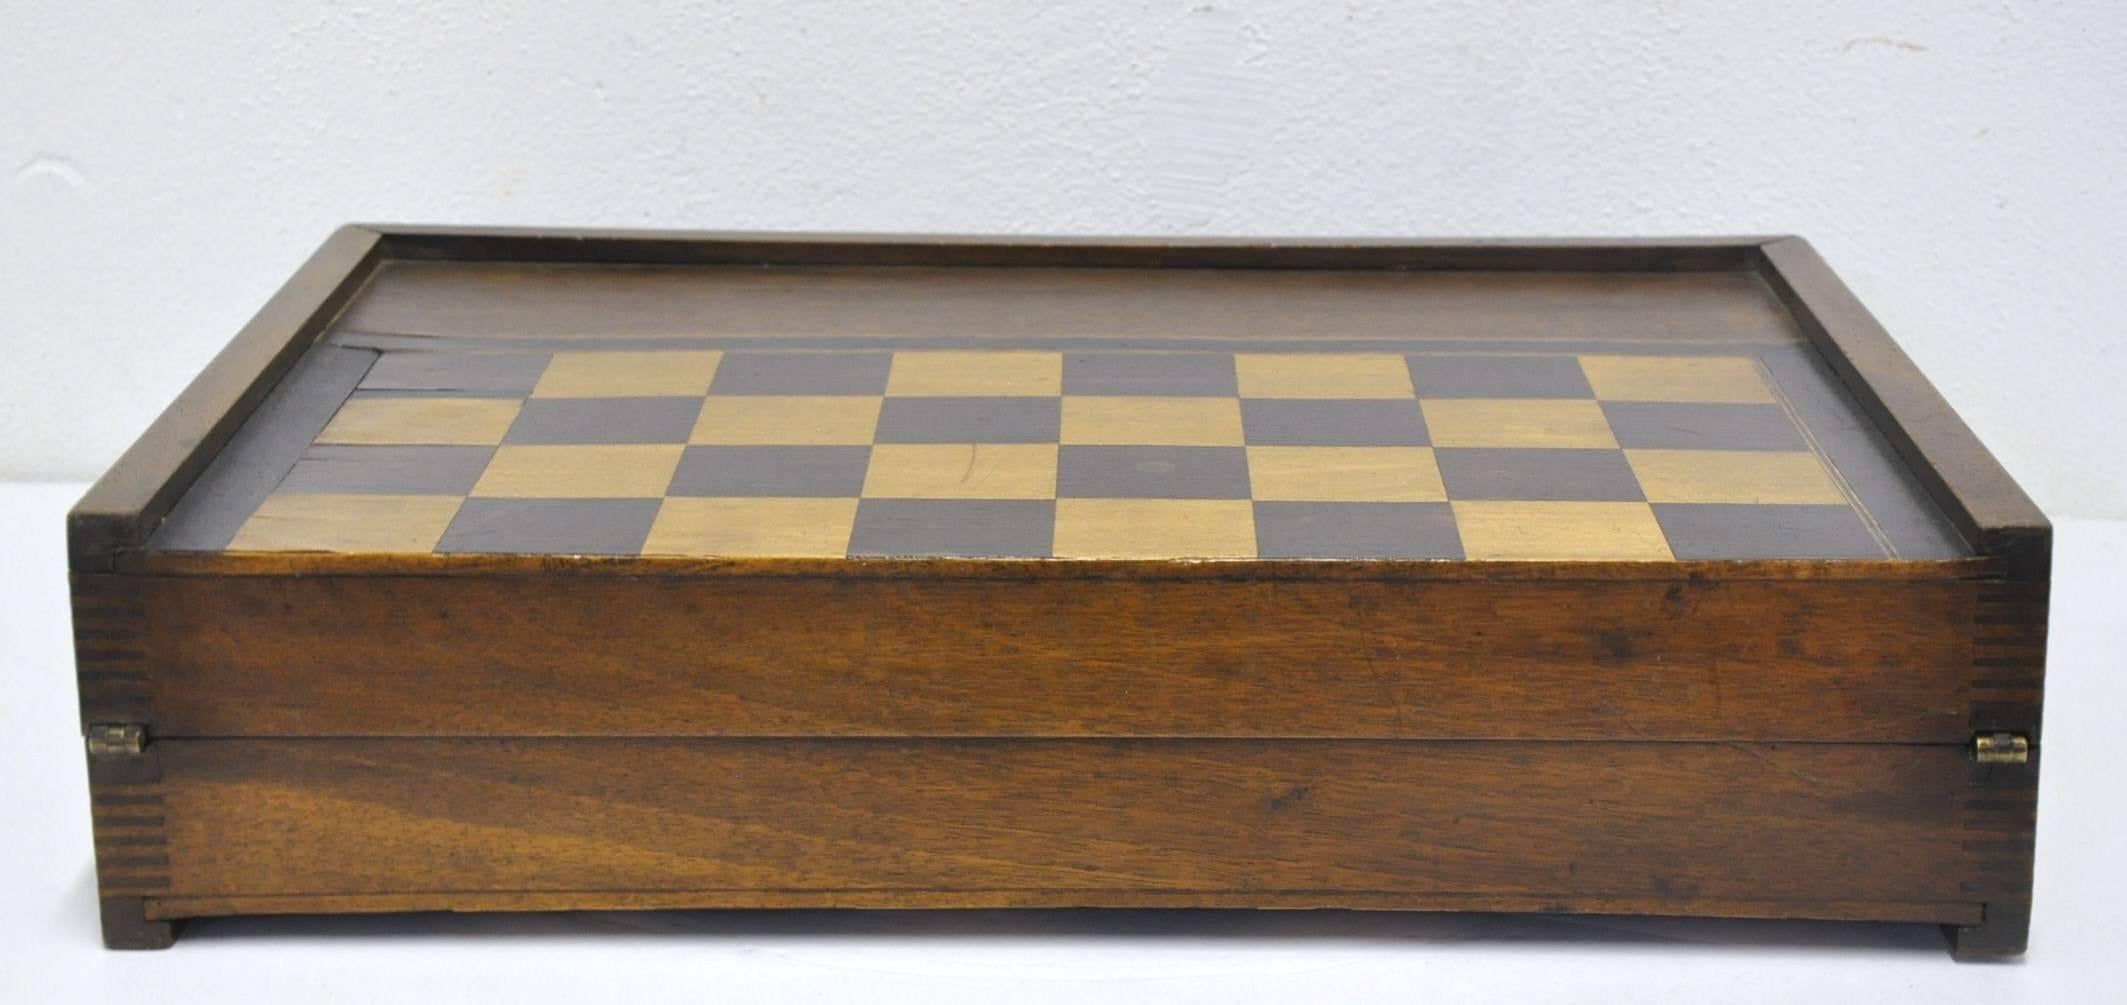 Hand-Crafted 19th Century, French Backgammon and Checkers Game Signed Arthaud, Paris